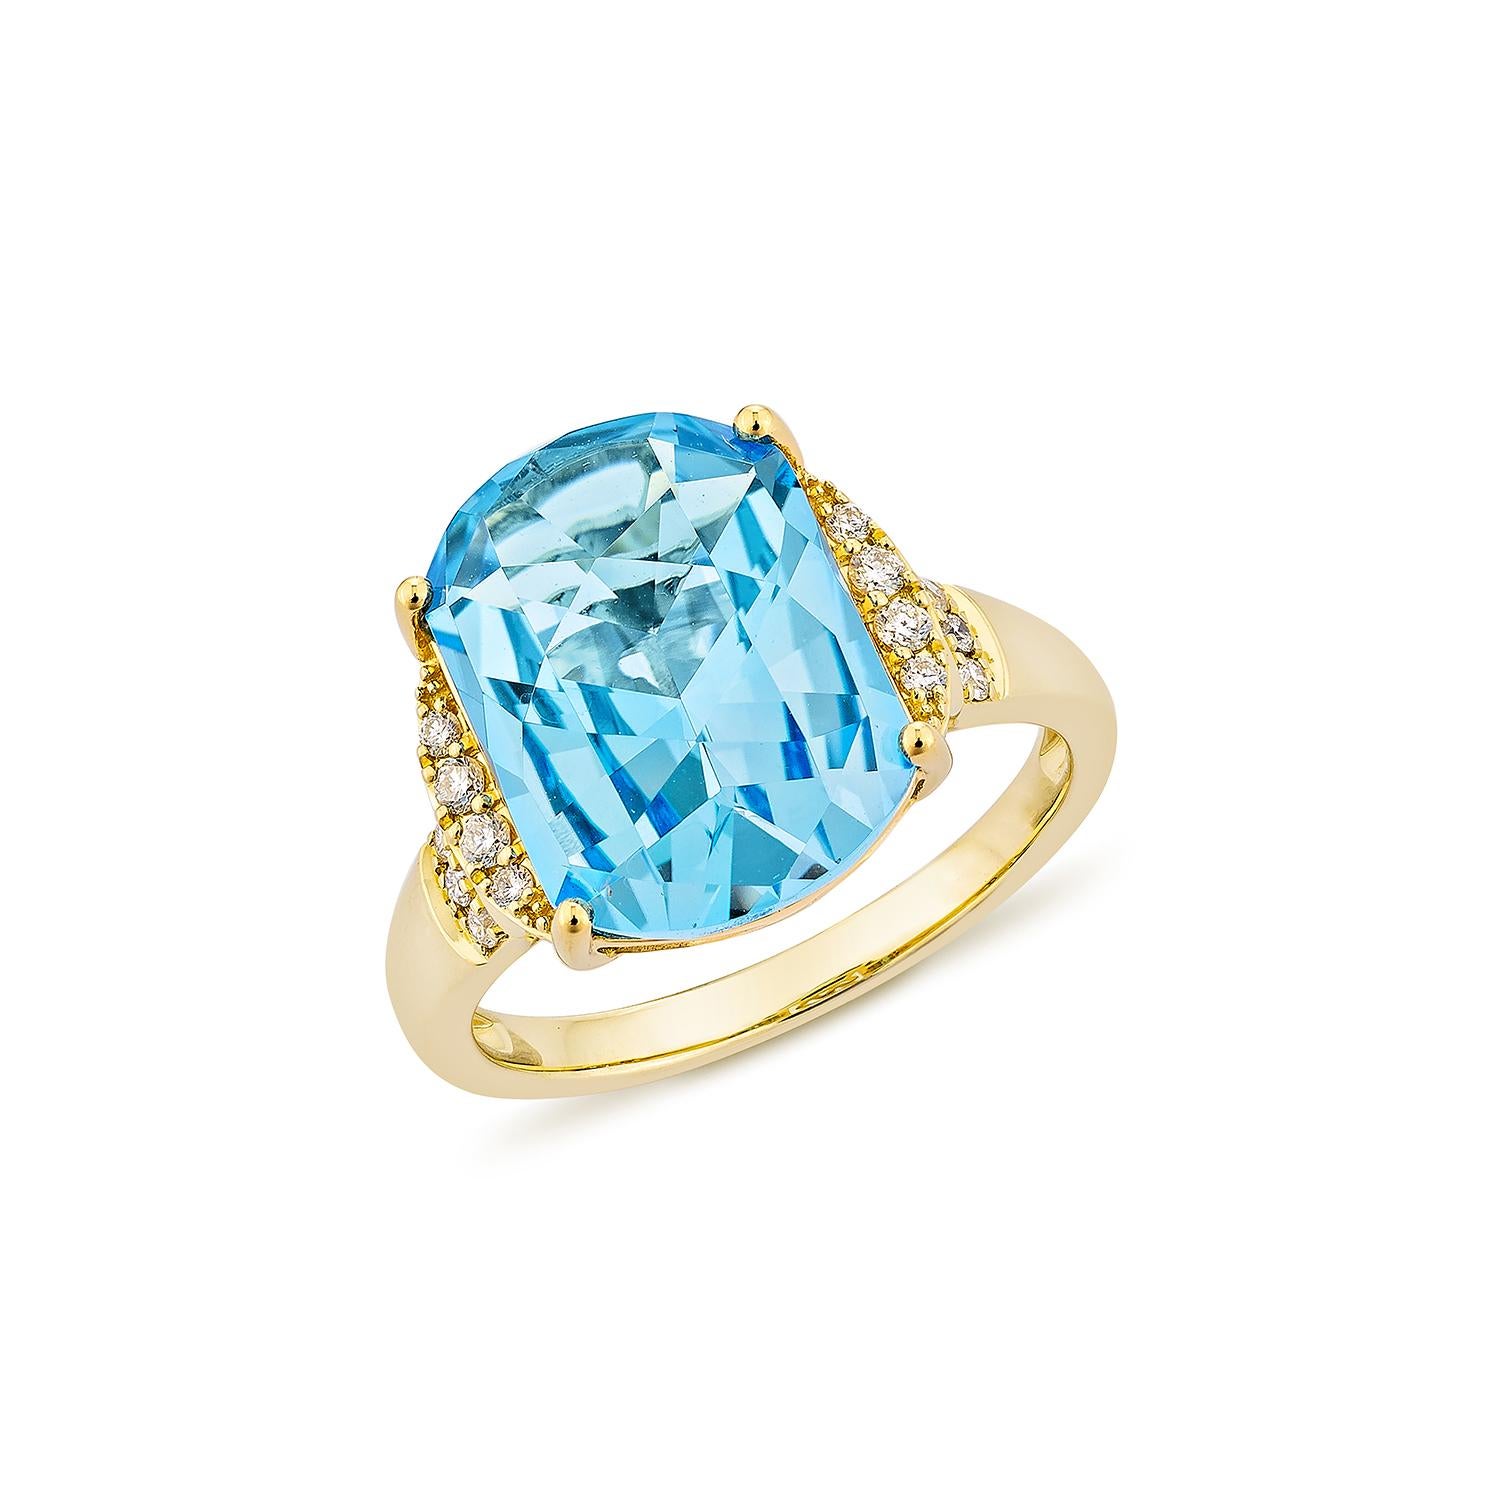 Contemporary 7.66 Carat Swiss Blue Topaz Fancy Ring in 18Karat Yellow Gold with Diamond. For Sale